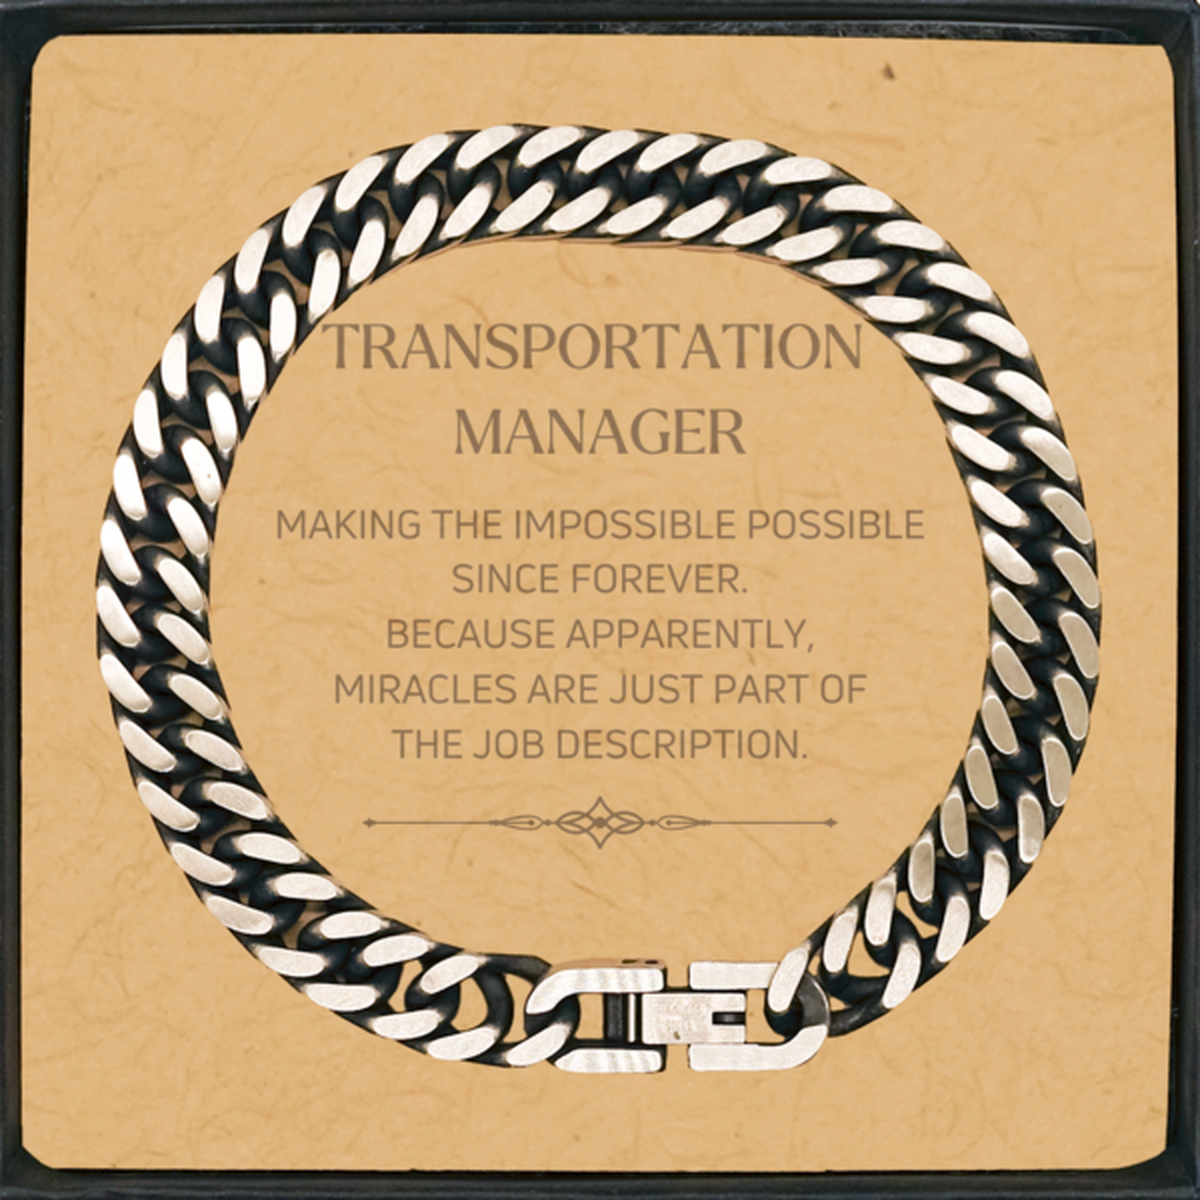 Funny Transportation Manager Gifts, Miracles are just part of the job description, Inspirational Birthday Cuban Link Chain Bracelet For Transportation Manager, Men, Women, Coworkers, Friends, Boss